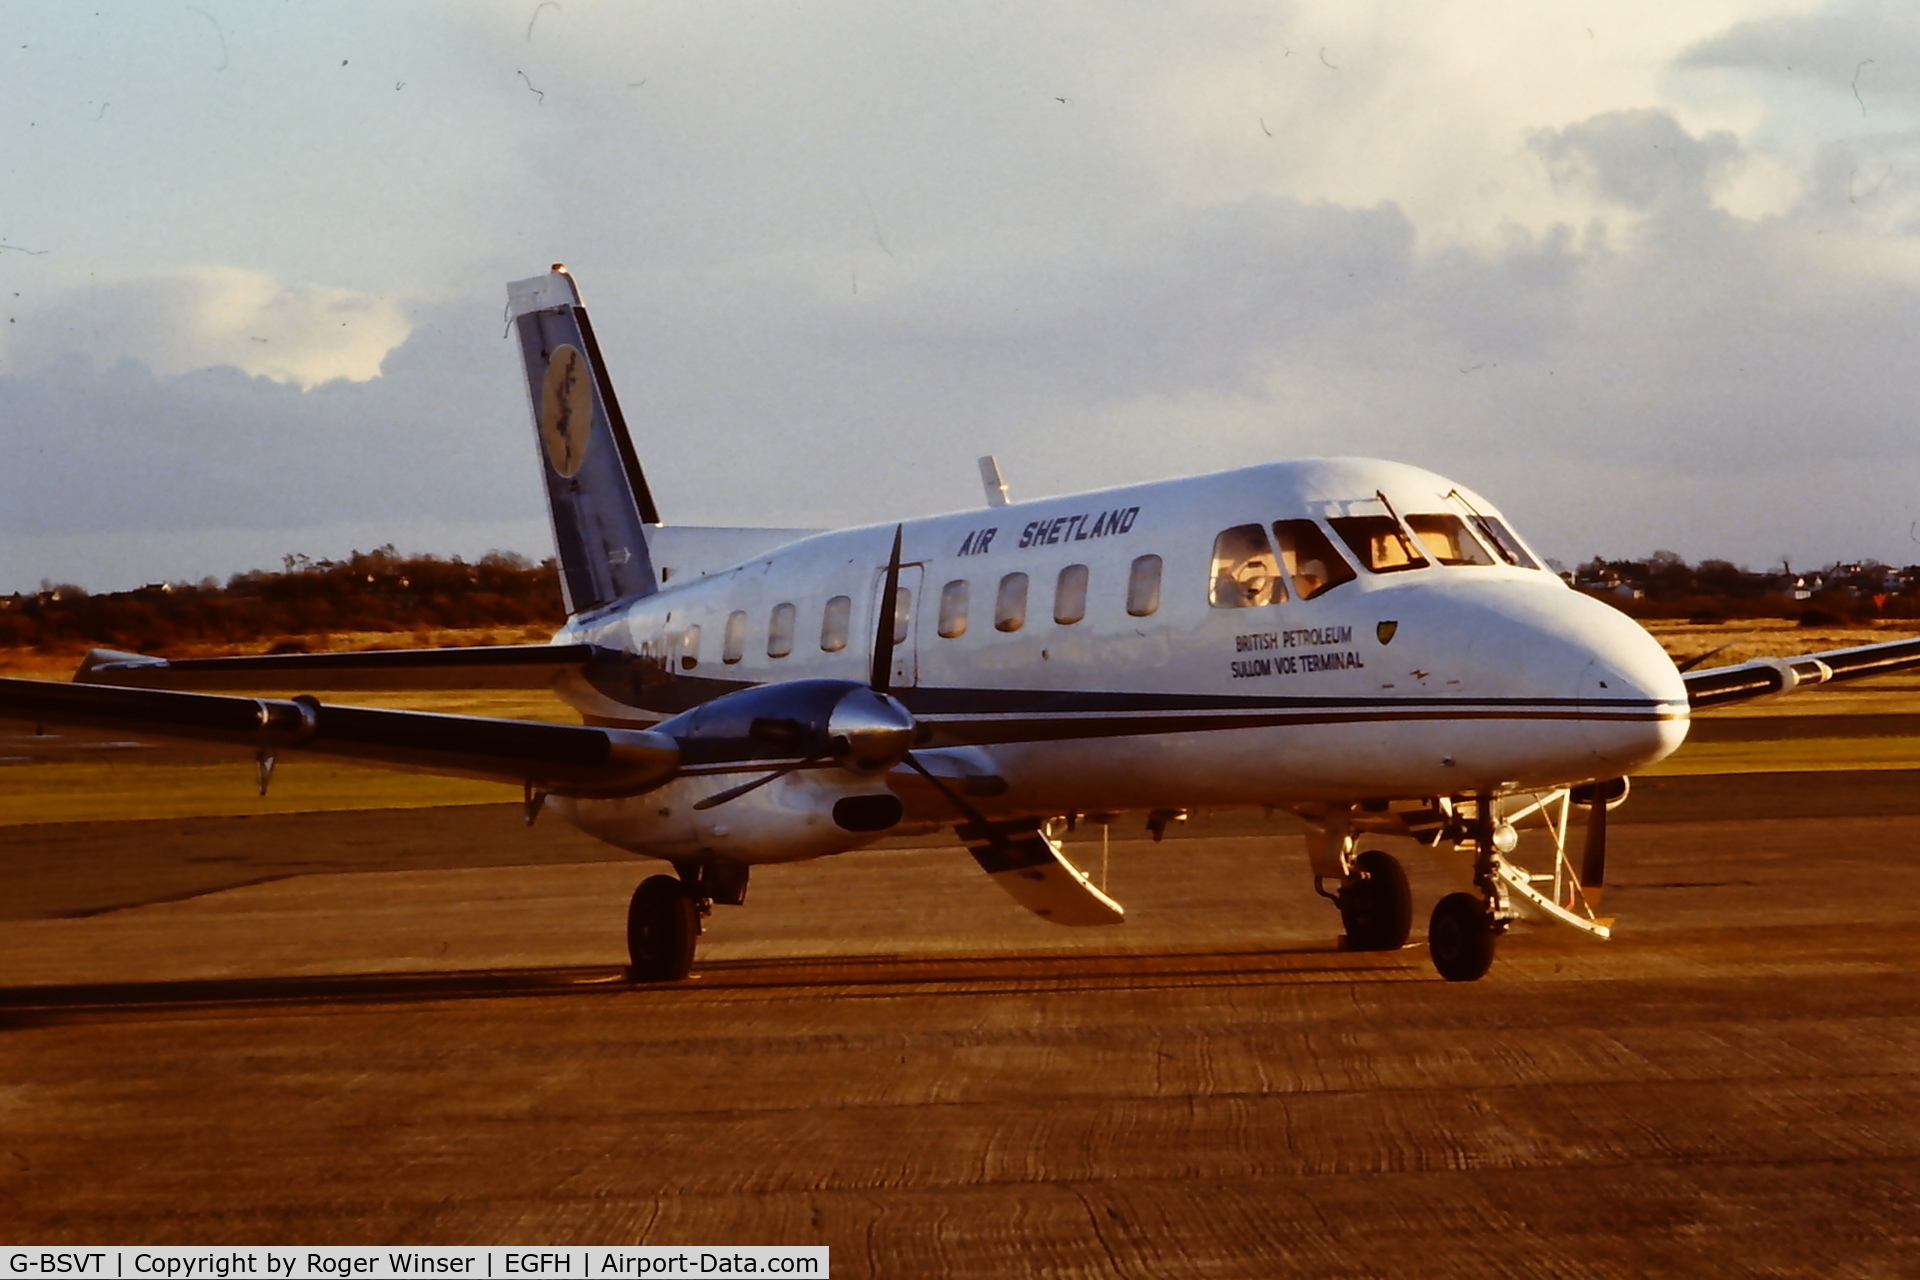 G-BSVT, 1977 Embraer EMB-110P2 Bandeirante C/N 110153, Air Shetland Bandeirante visiting Swansea Airport in the early 1980's. Carrying the inscription British Petroleum Sollum Voe Terminal